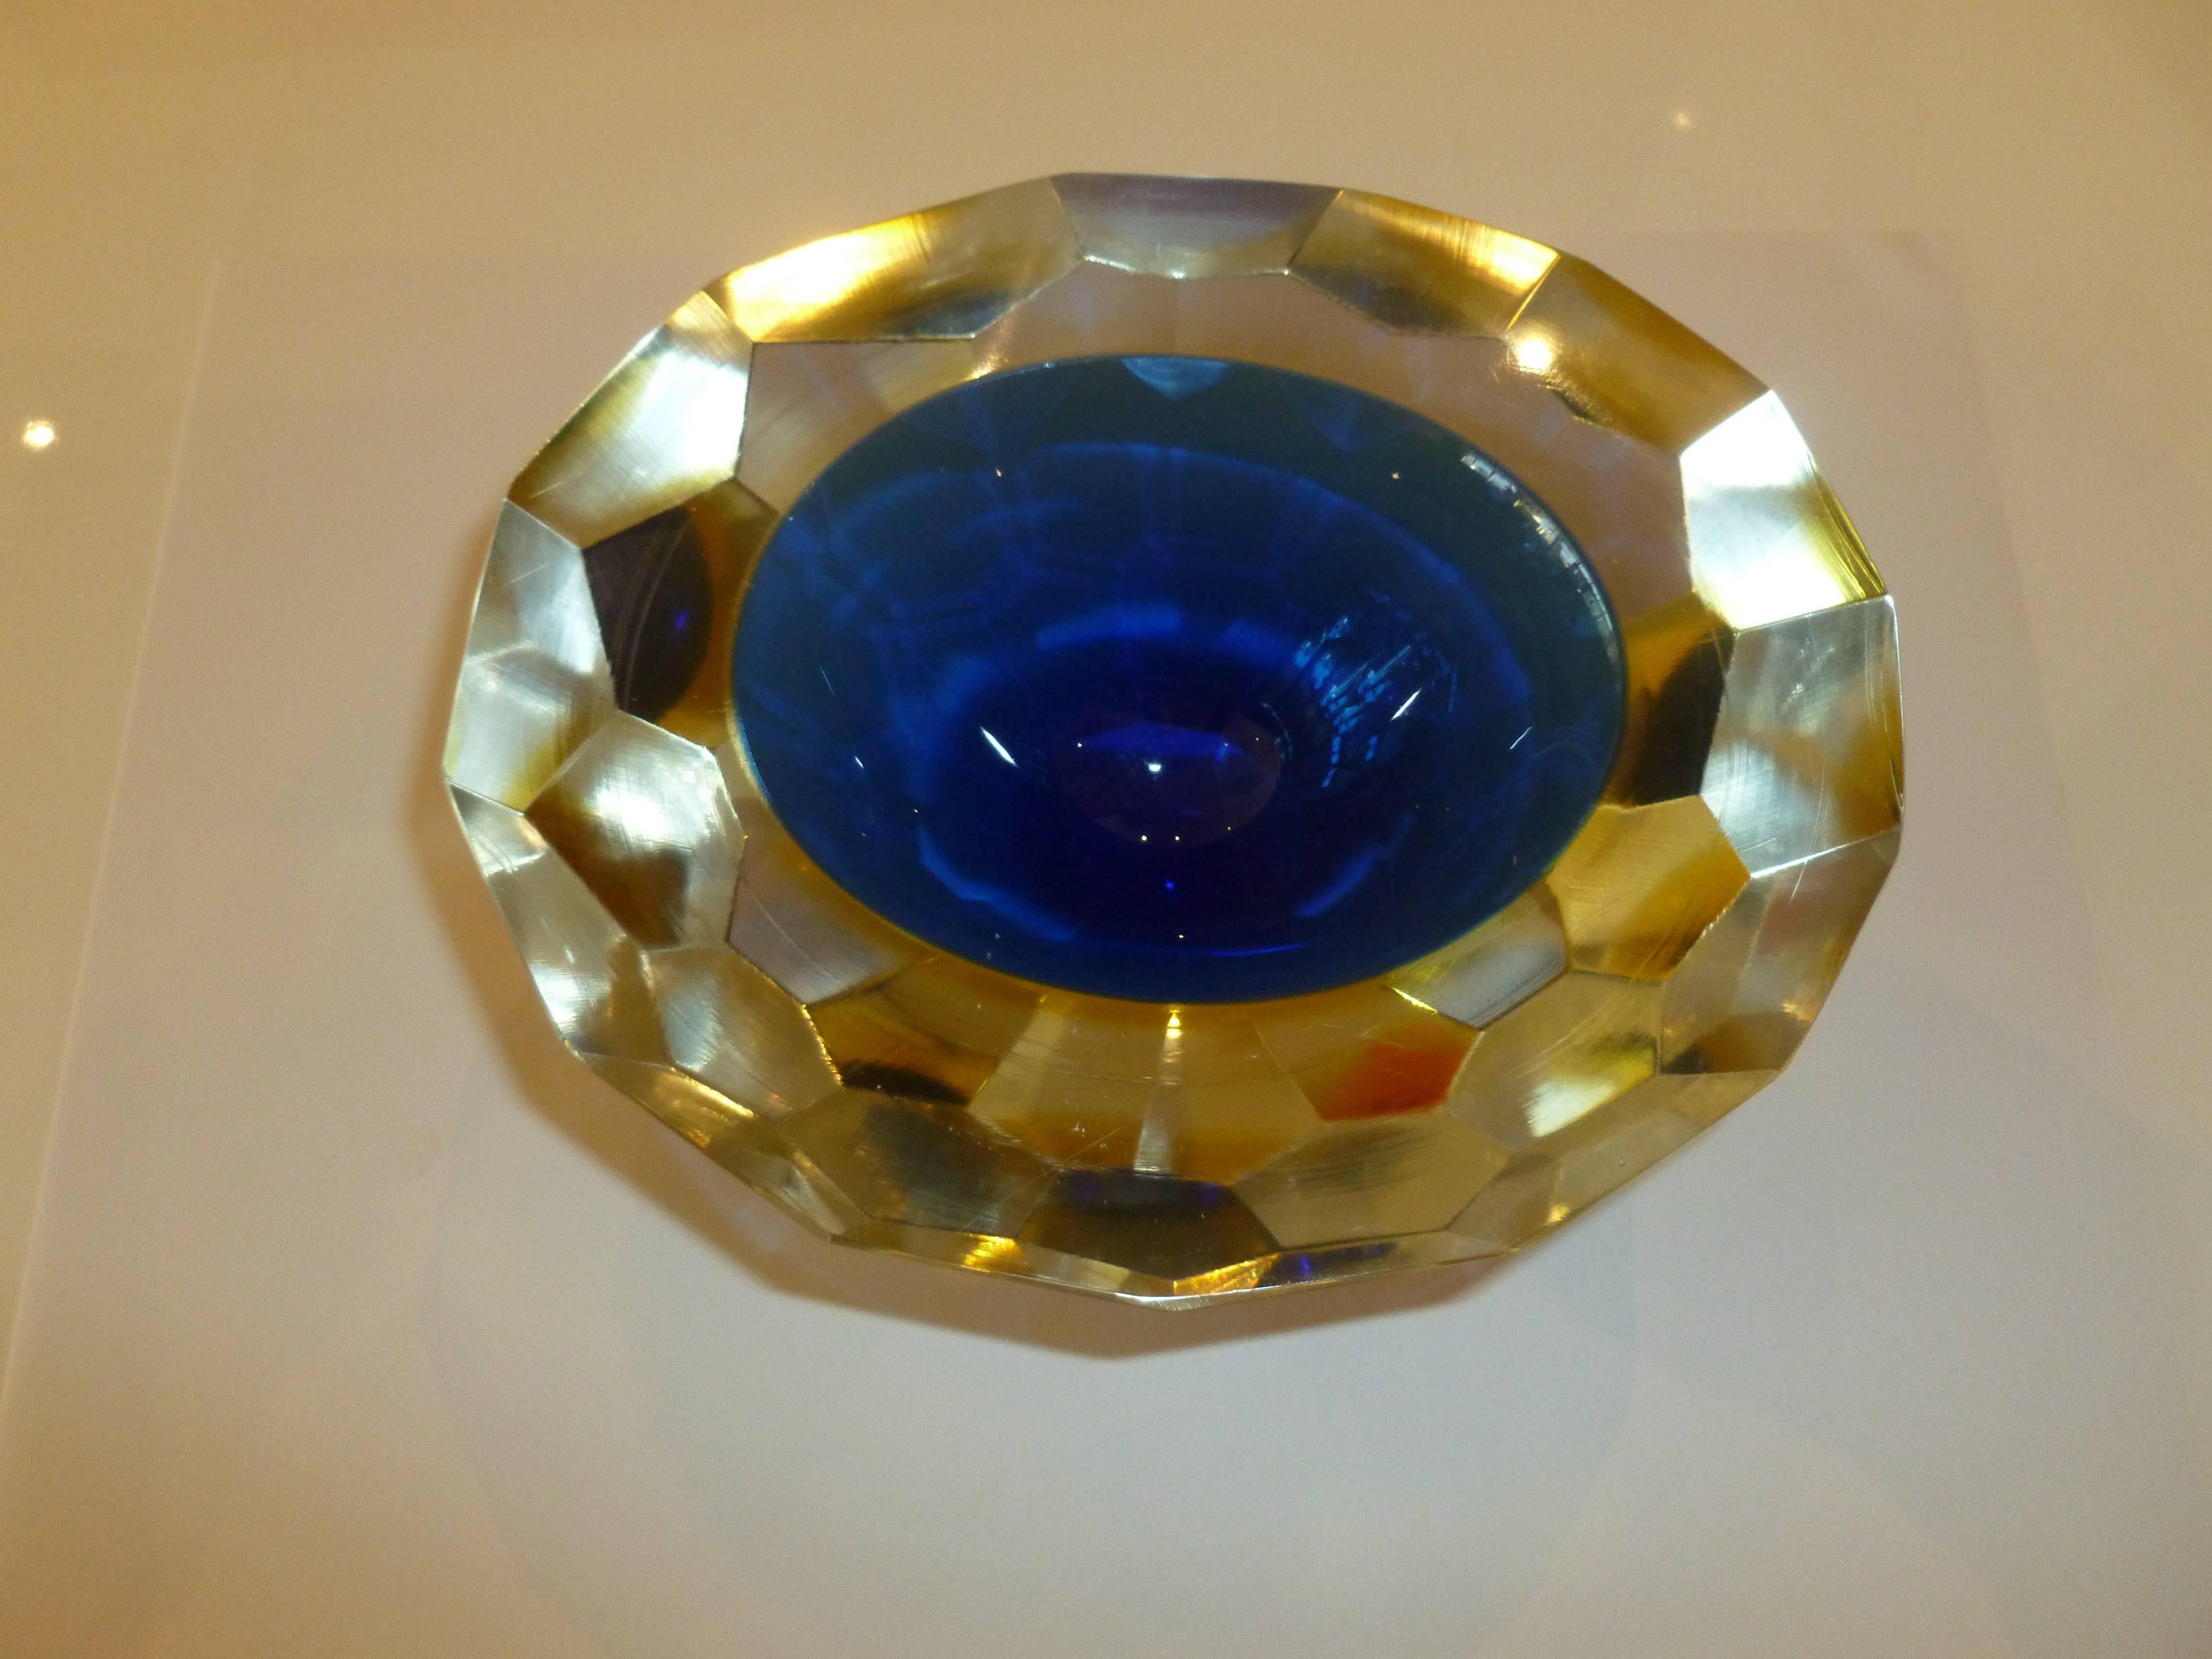 This stunning diamond faceted vintage Italian Murano oval Sommerso geode bowl is beyond spectacular. It is diamond faceted all the way through. The colors of amber meet yellow with a royal blue centre shine and glisten as the colors go from light to